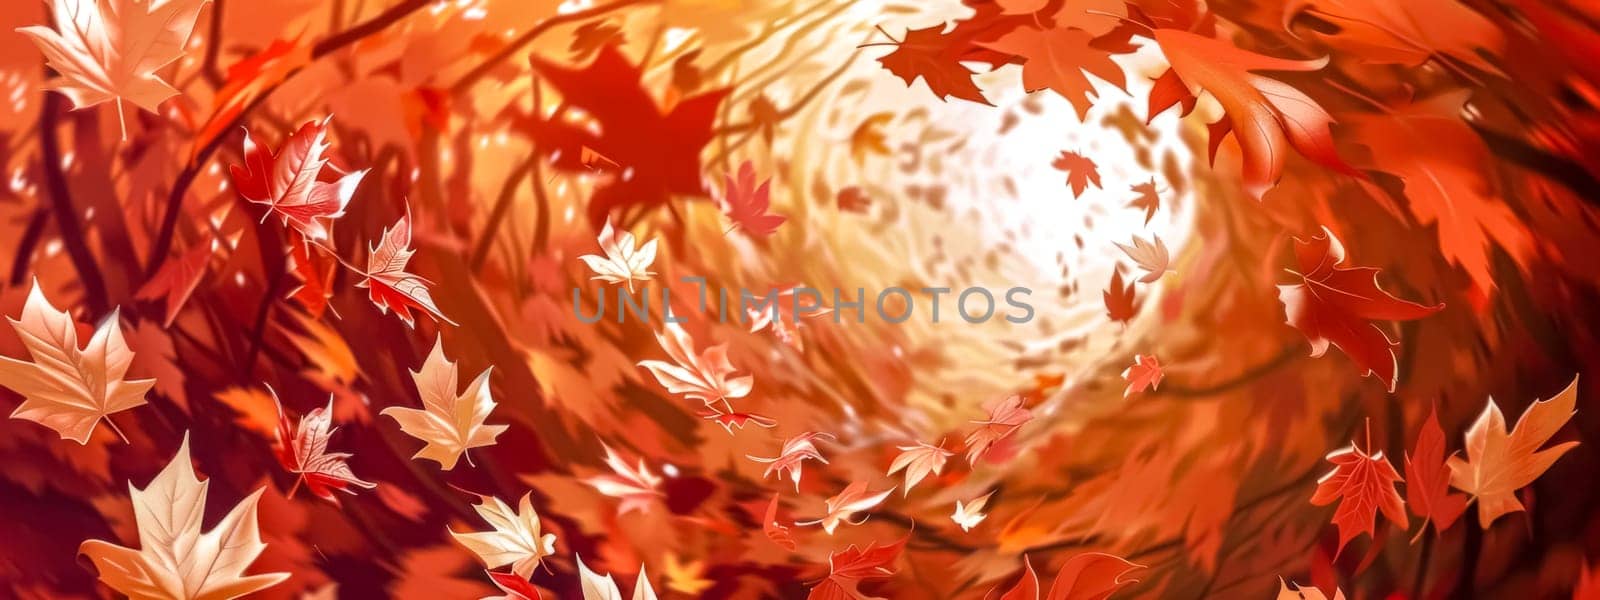 Abstract representation of autumn leaves caught in a swirling wind pattern with warm tones